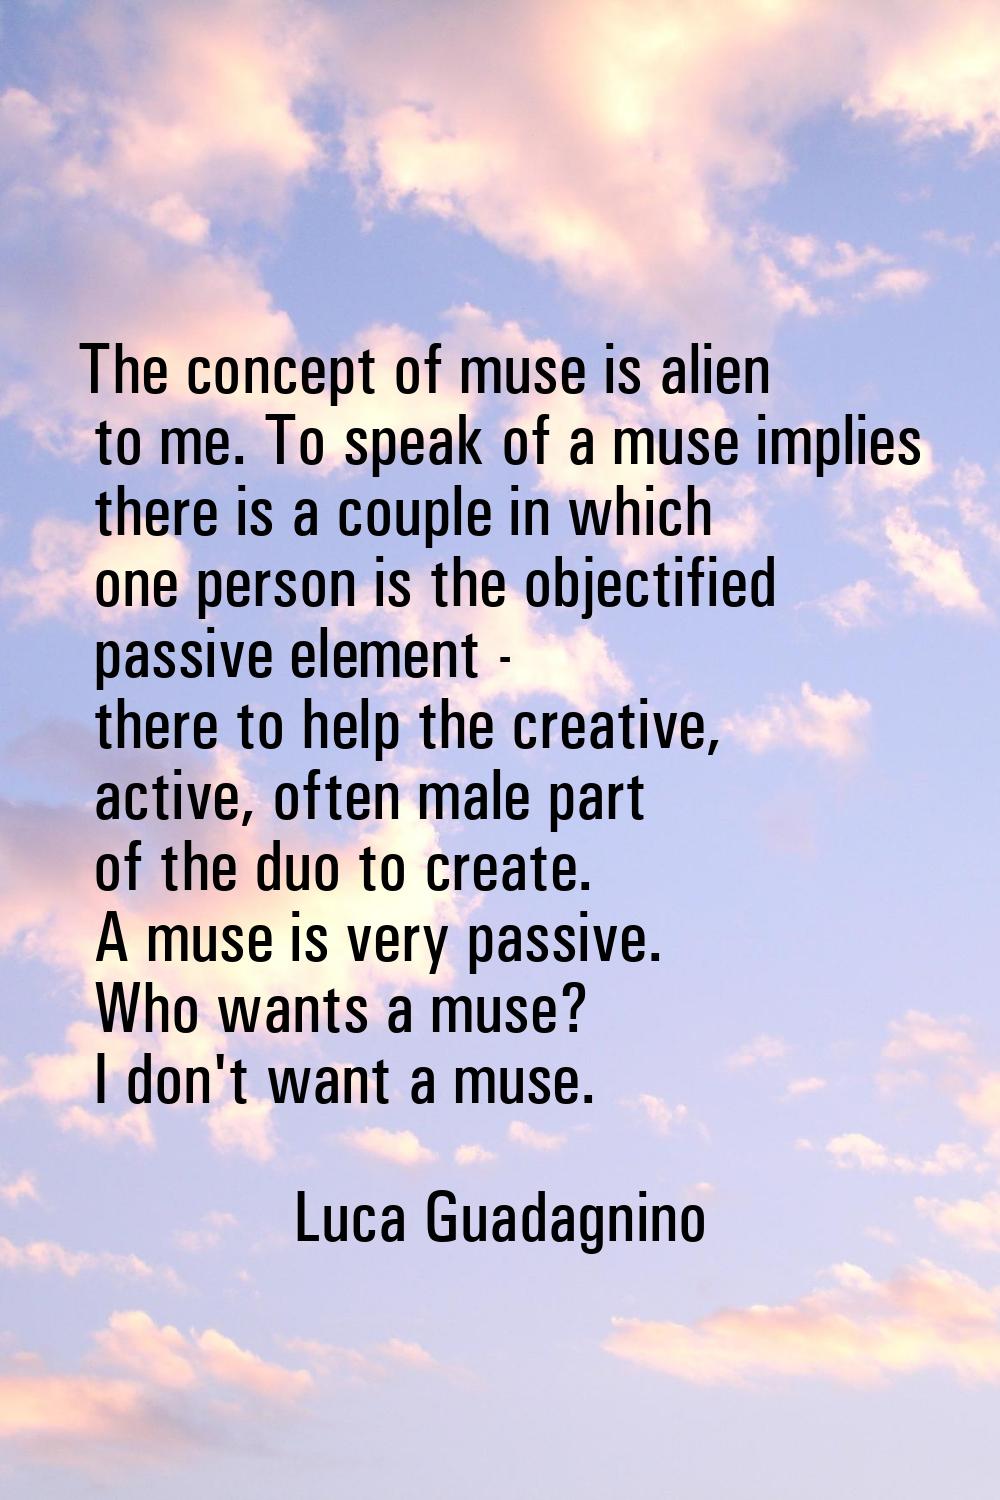 The concept of muse is alien to me. To speak of a muse implies there is a couple in which one perso